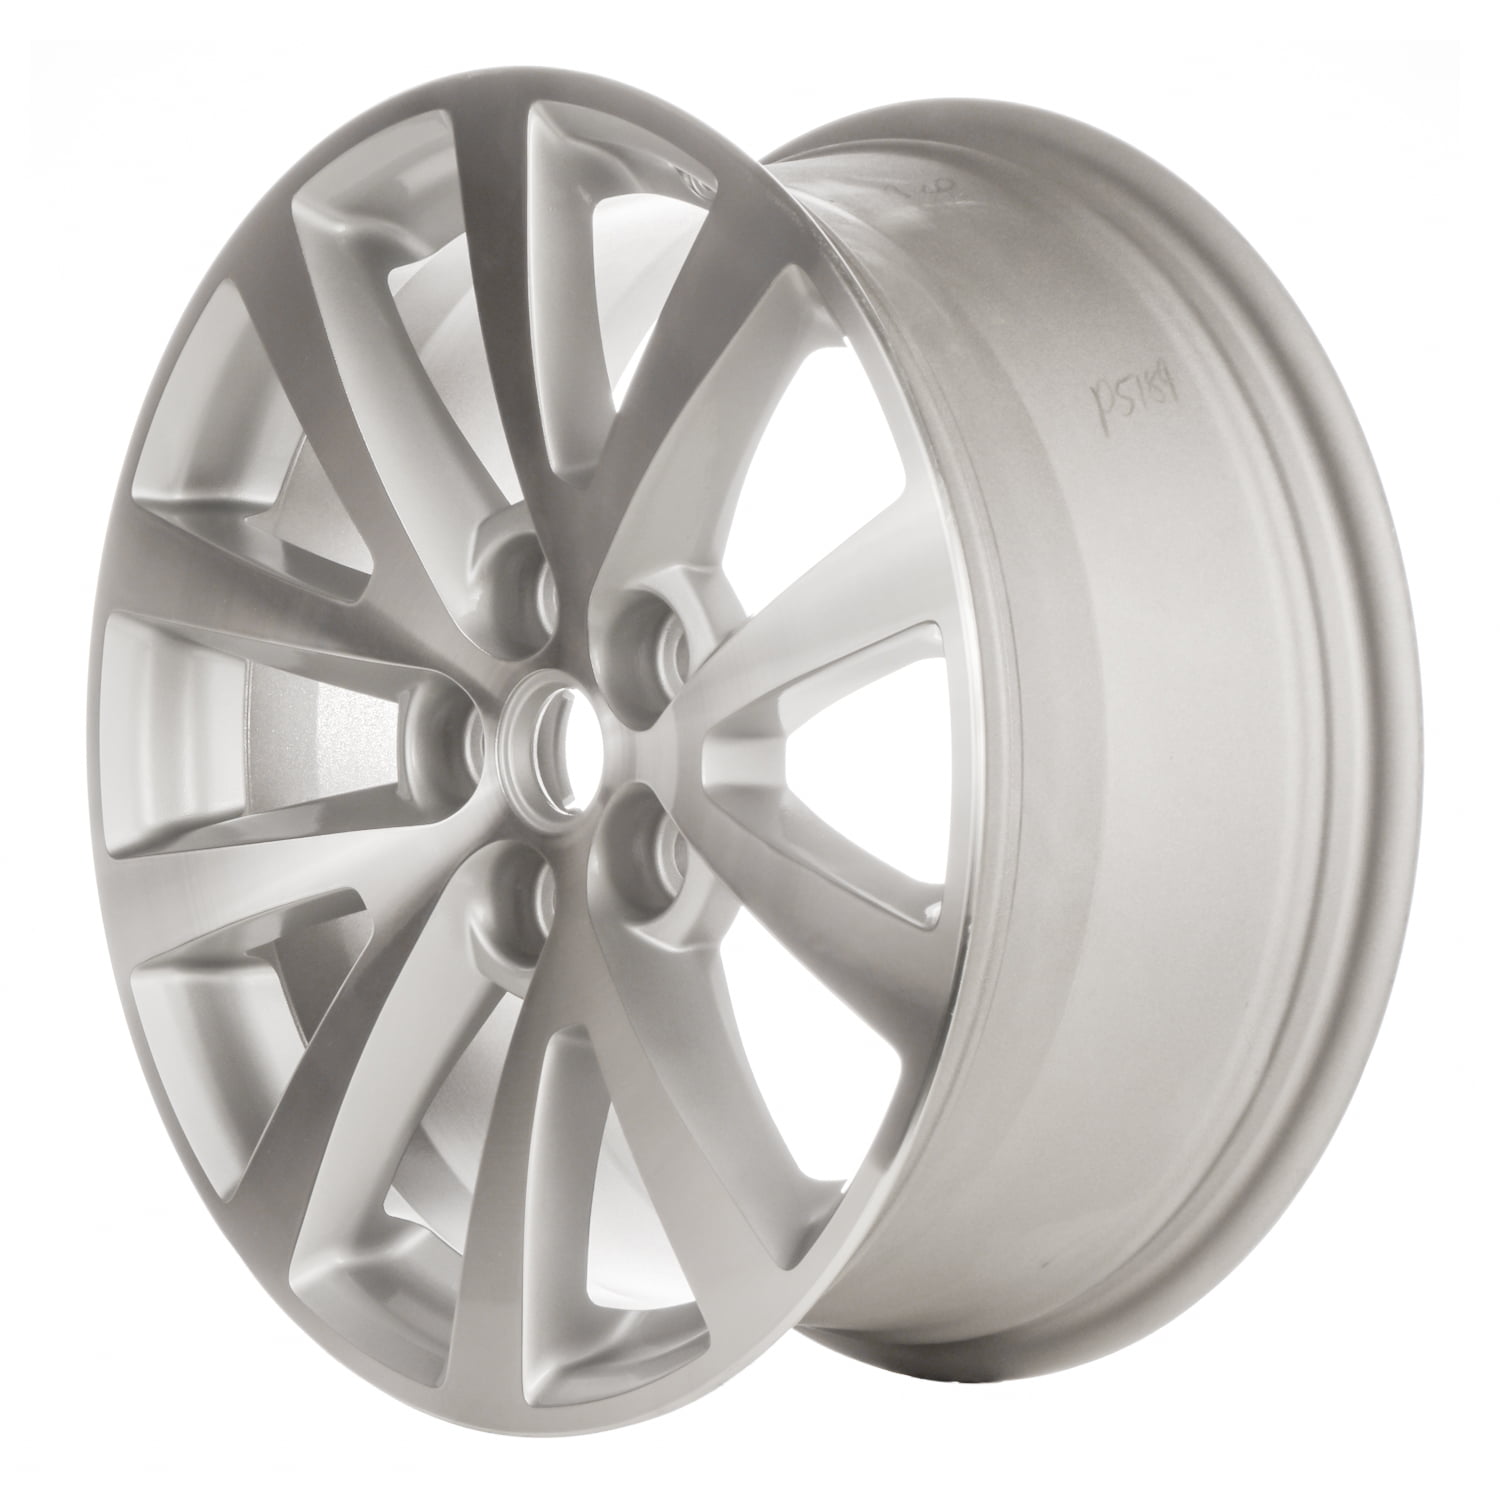 Machined and Silver Compatible with 2008-2012 Chevy Malibu Aluminum Wheel Double Spoke 18 x 7 Inch 